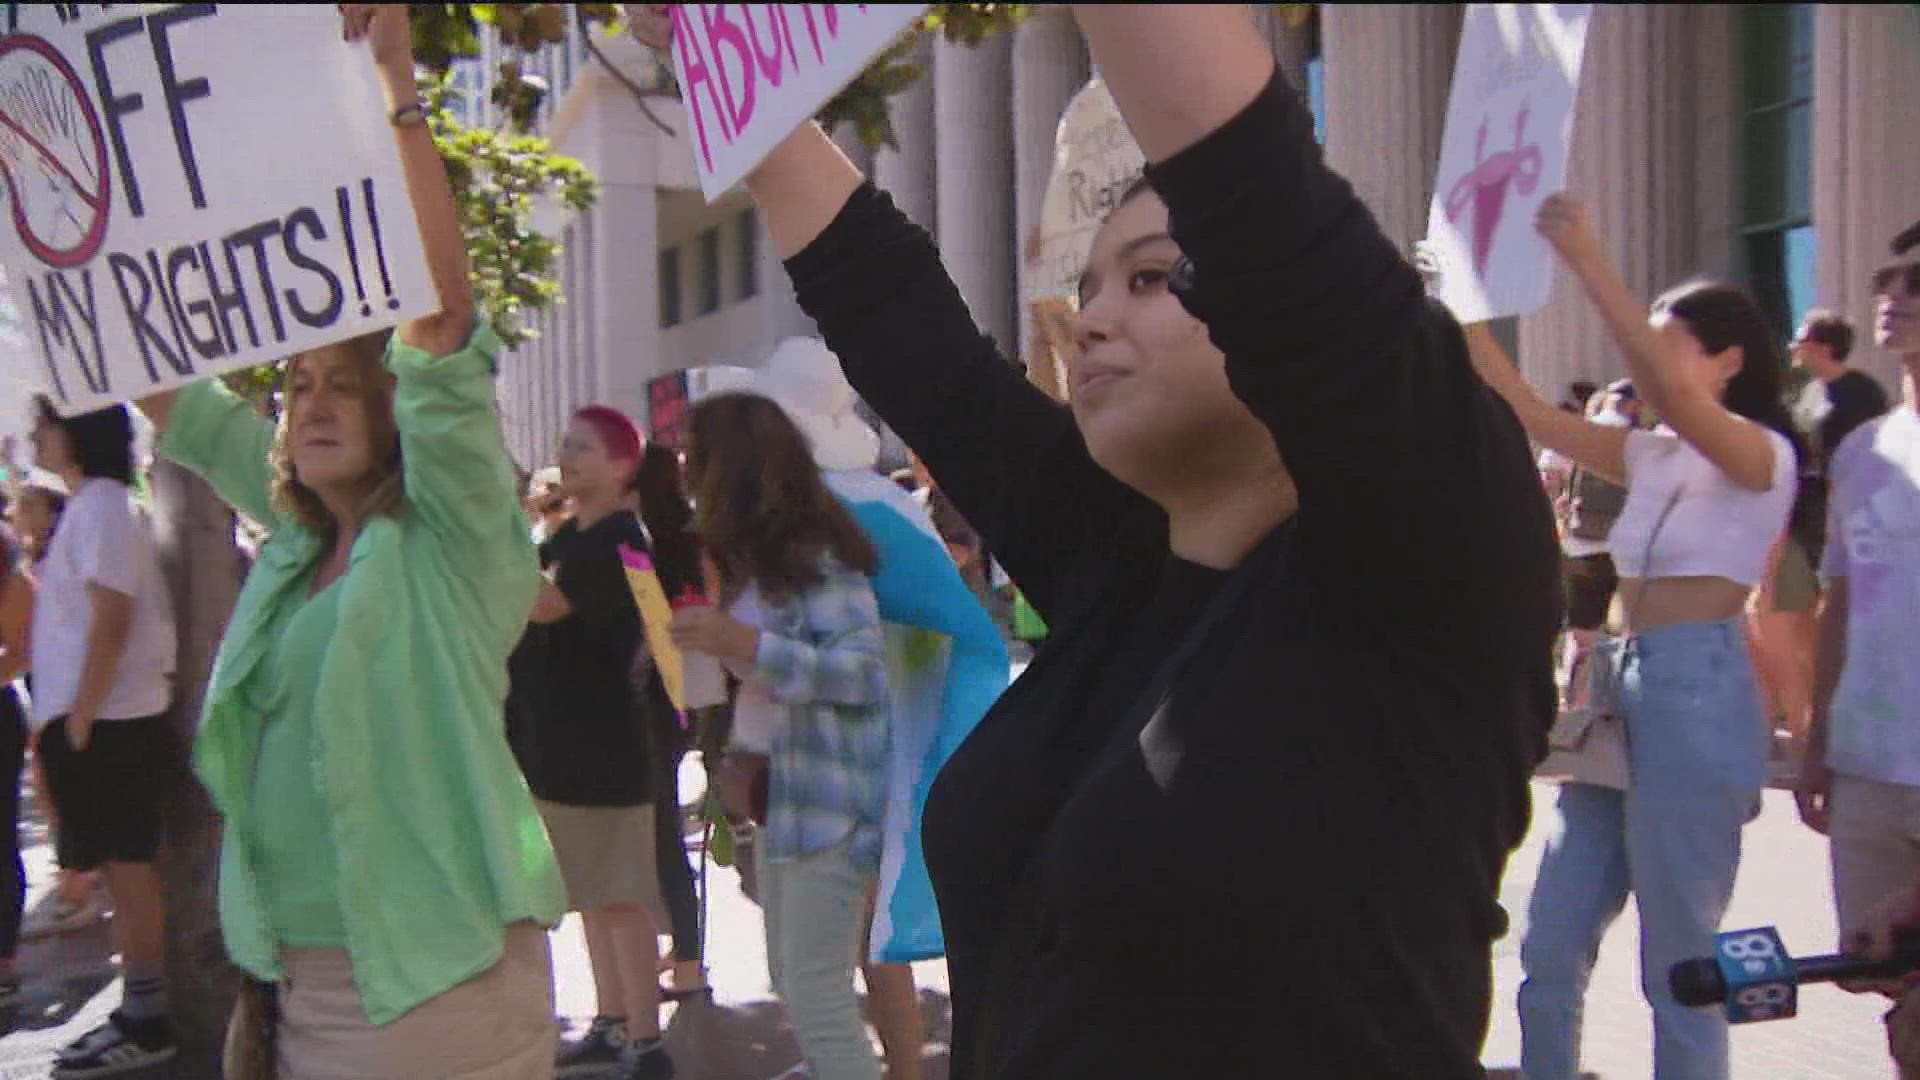 Rallies sparked around the country with many advocacy groups saying "when women are not free, no one is free."